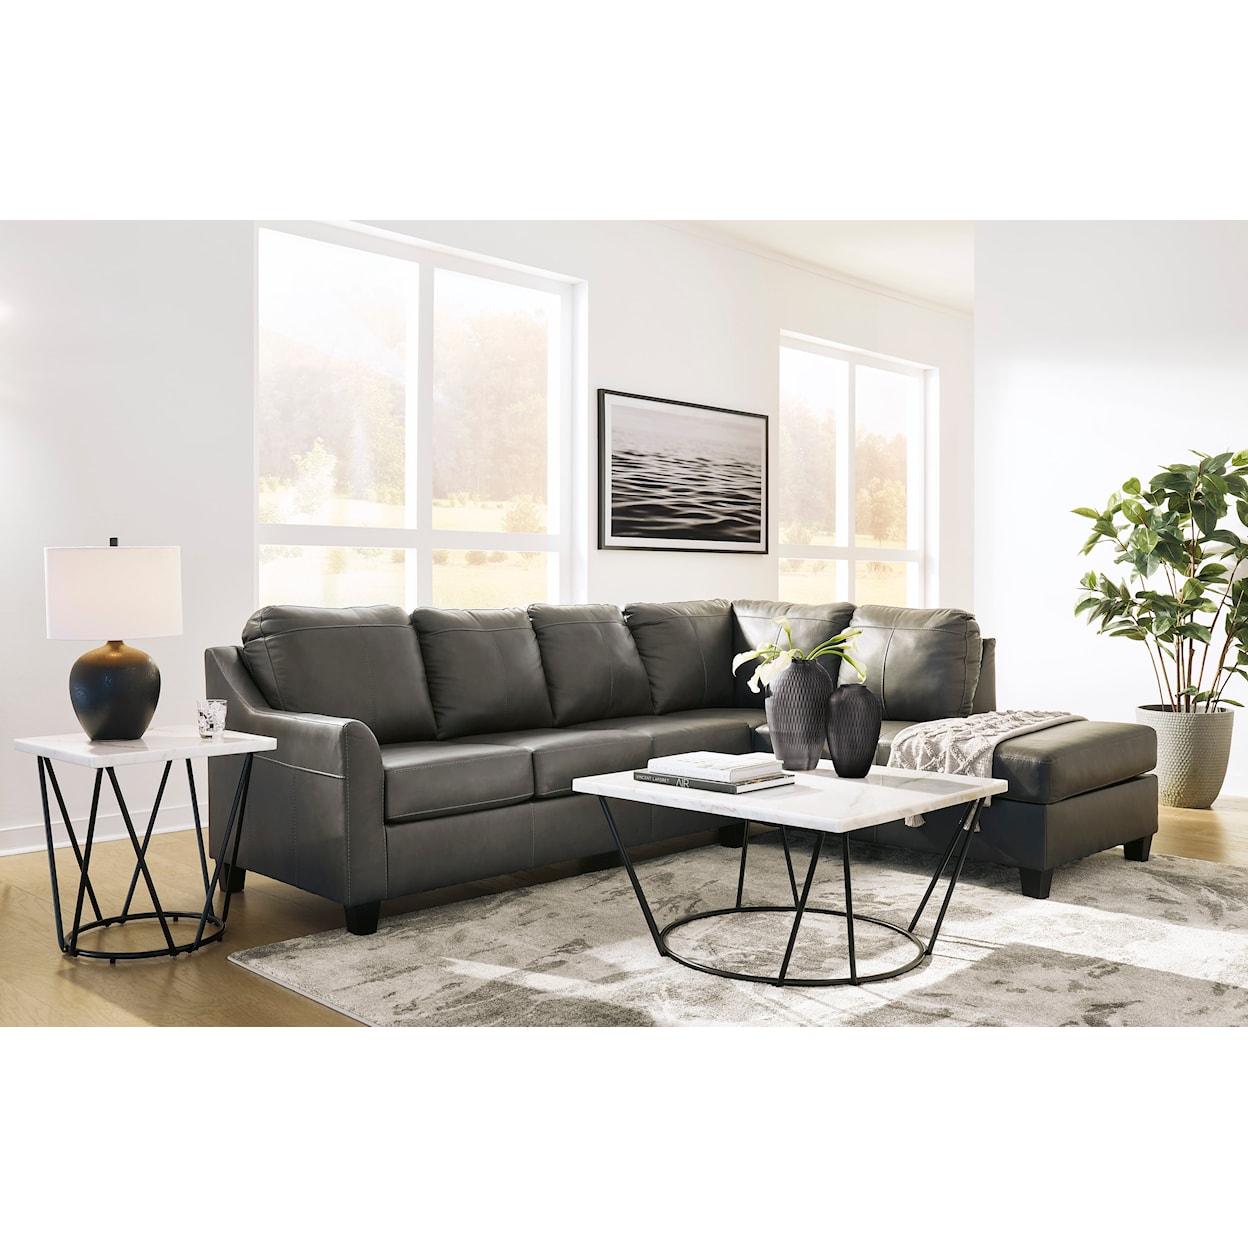 Signature Design by Ashley Furniture Valderno 2-Piece Sectional with Chaise